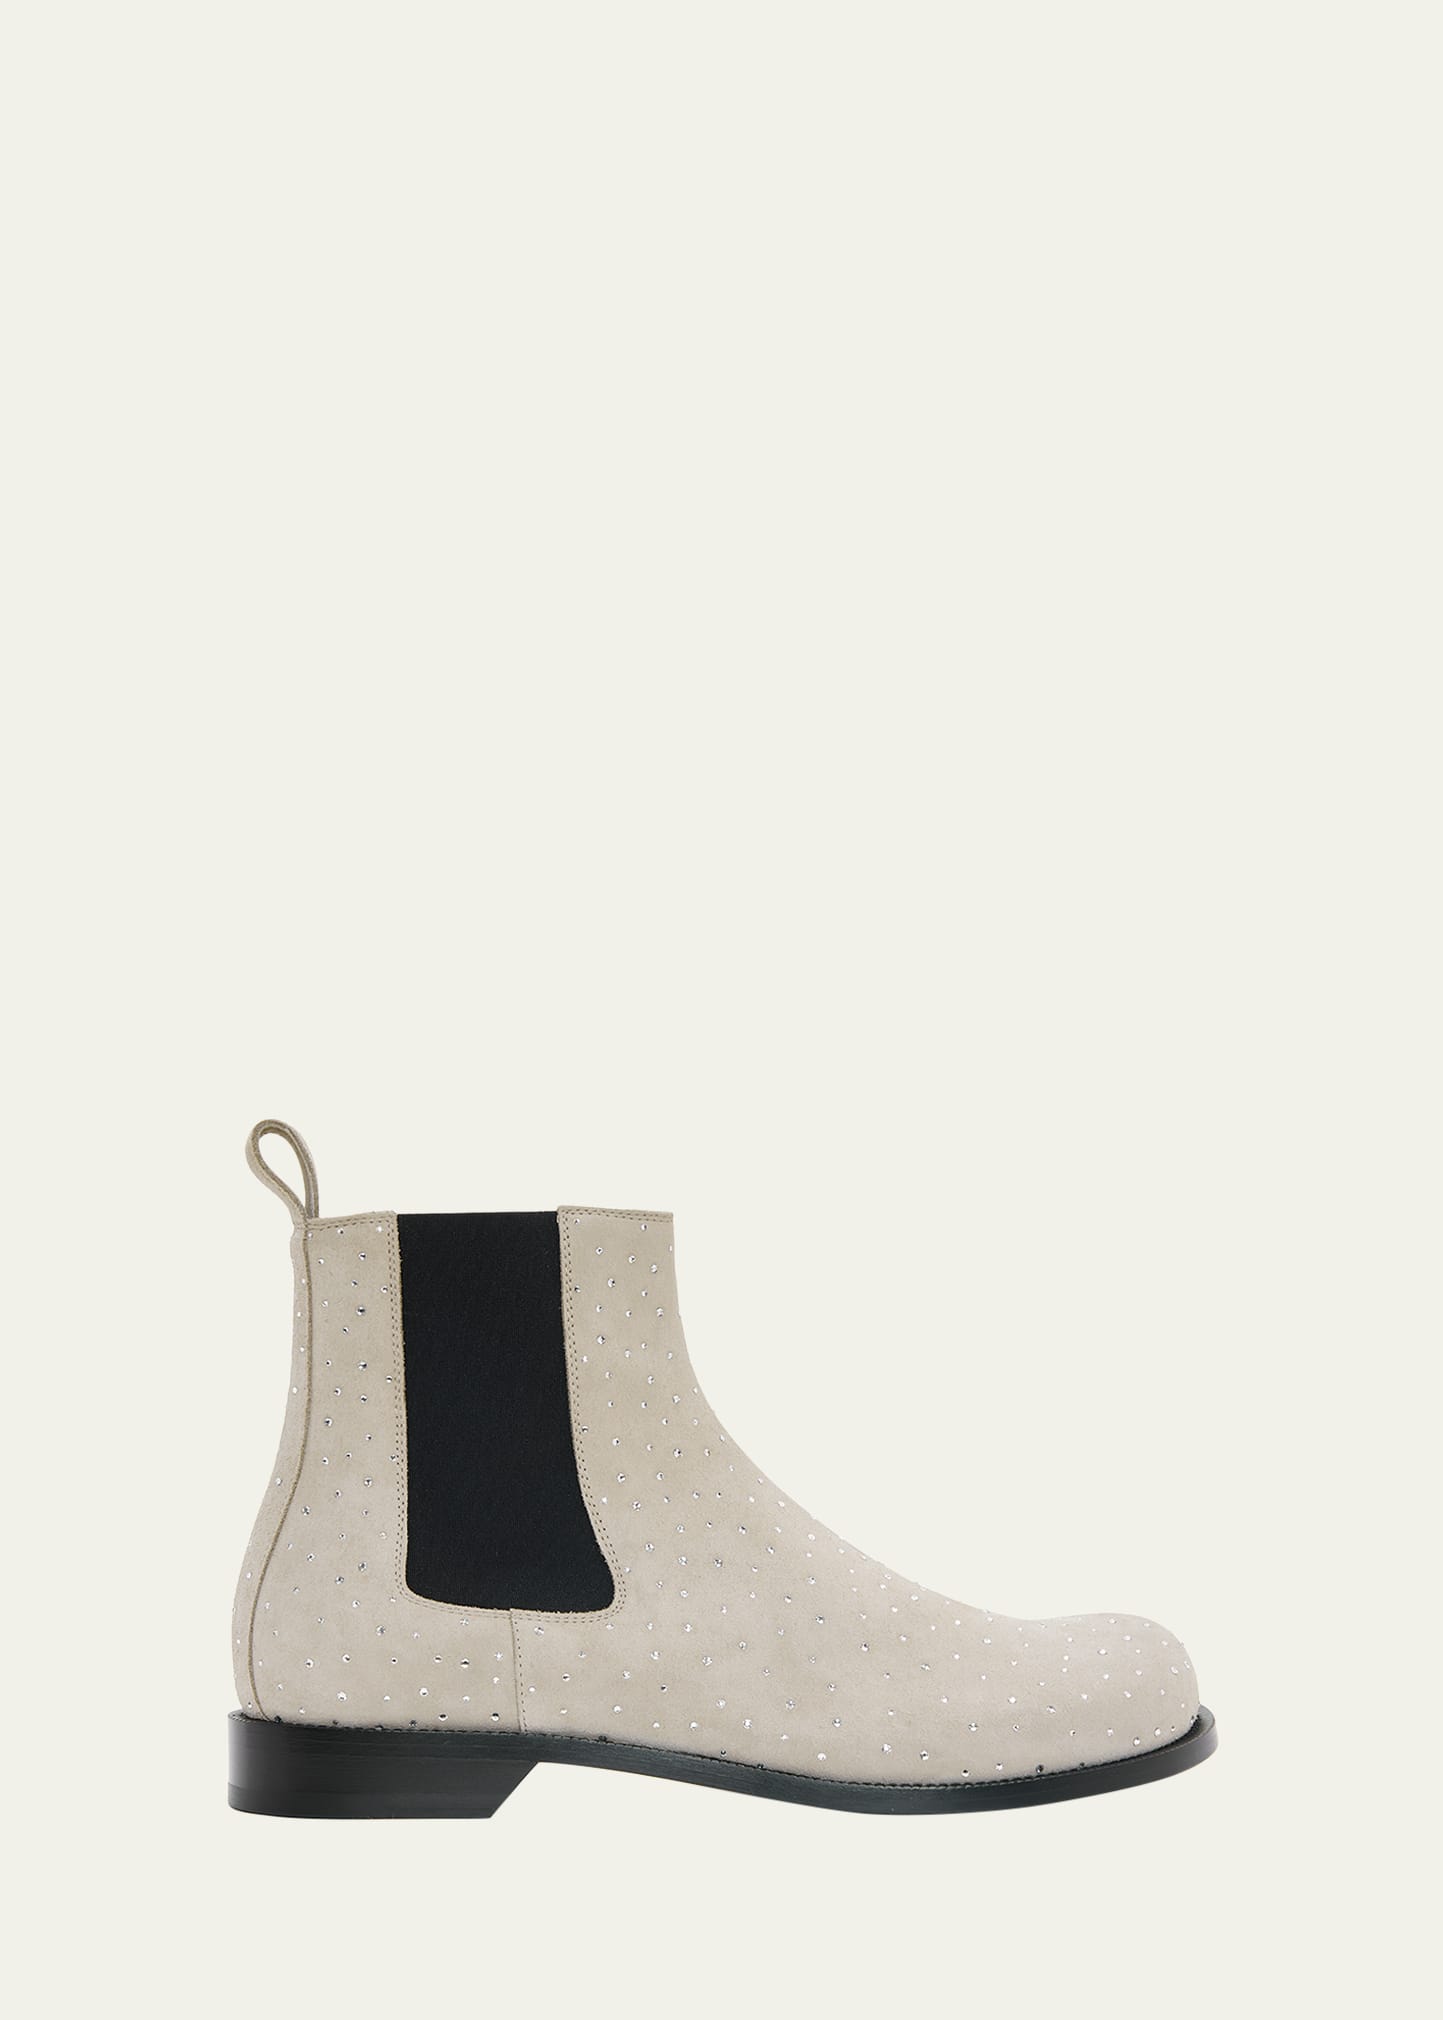 Loewe Men's Campo Suede And Crystal Chelsea Boots In Ecru